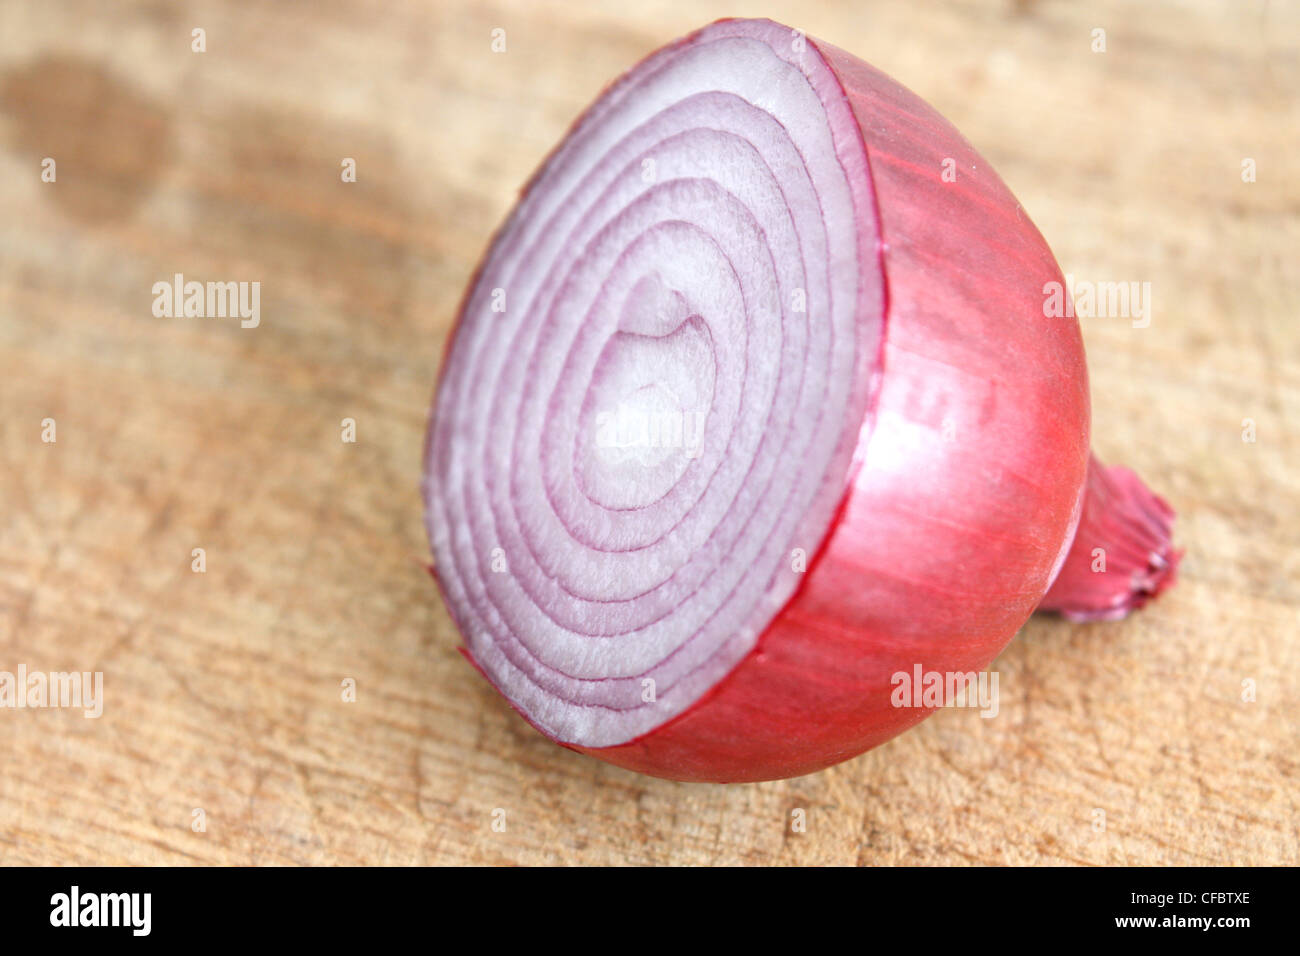 A sliced red onion on a wooden background Stock Photo